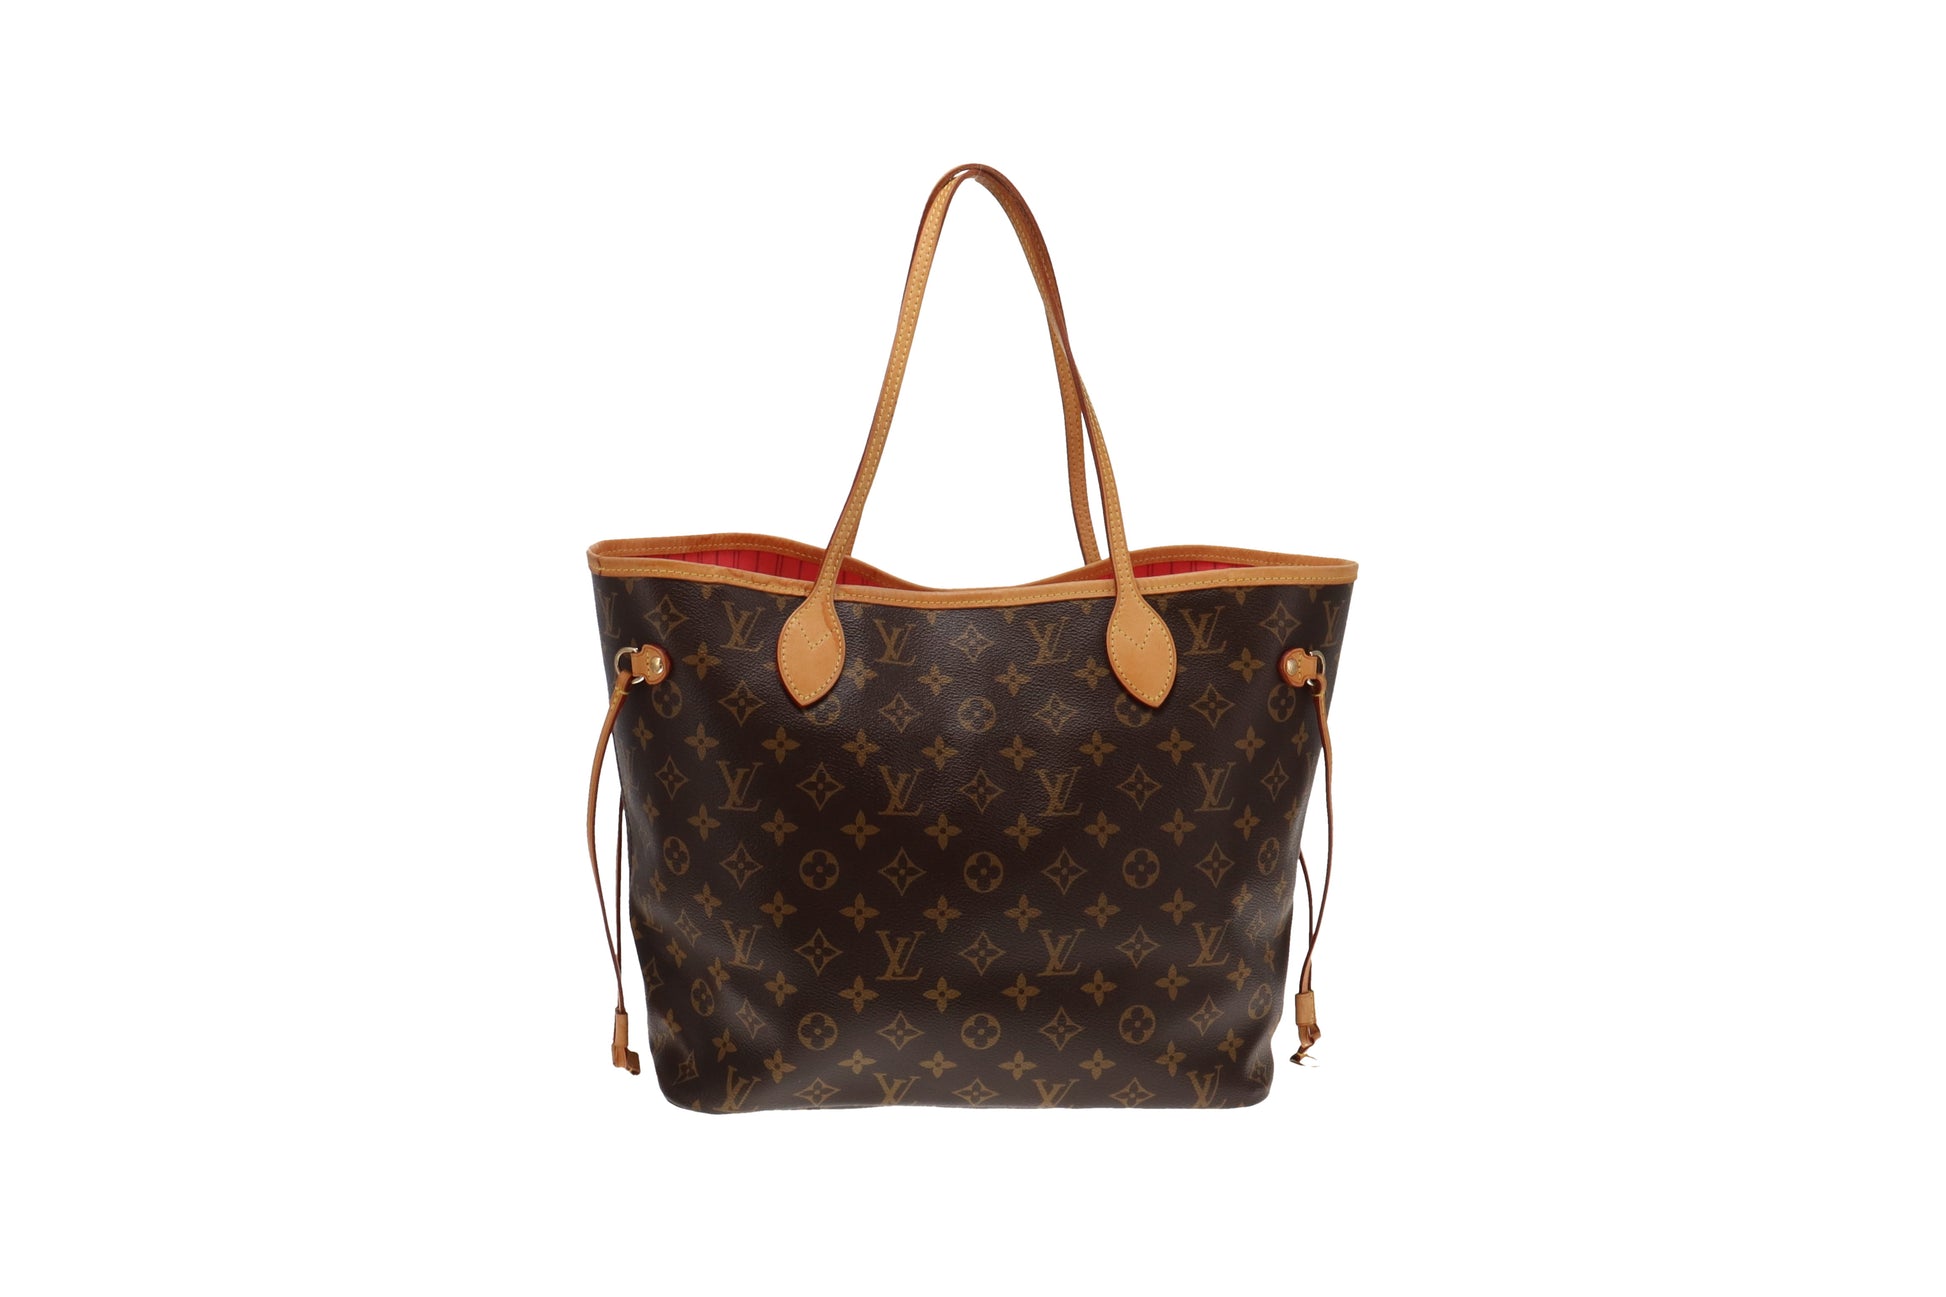 Louis Vuitton Neverfull Bags for sale in Dublin, Ireland